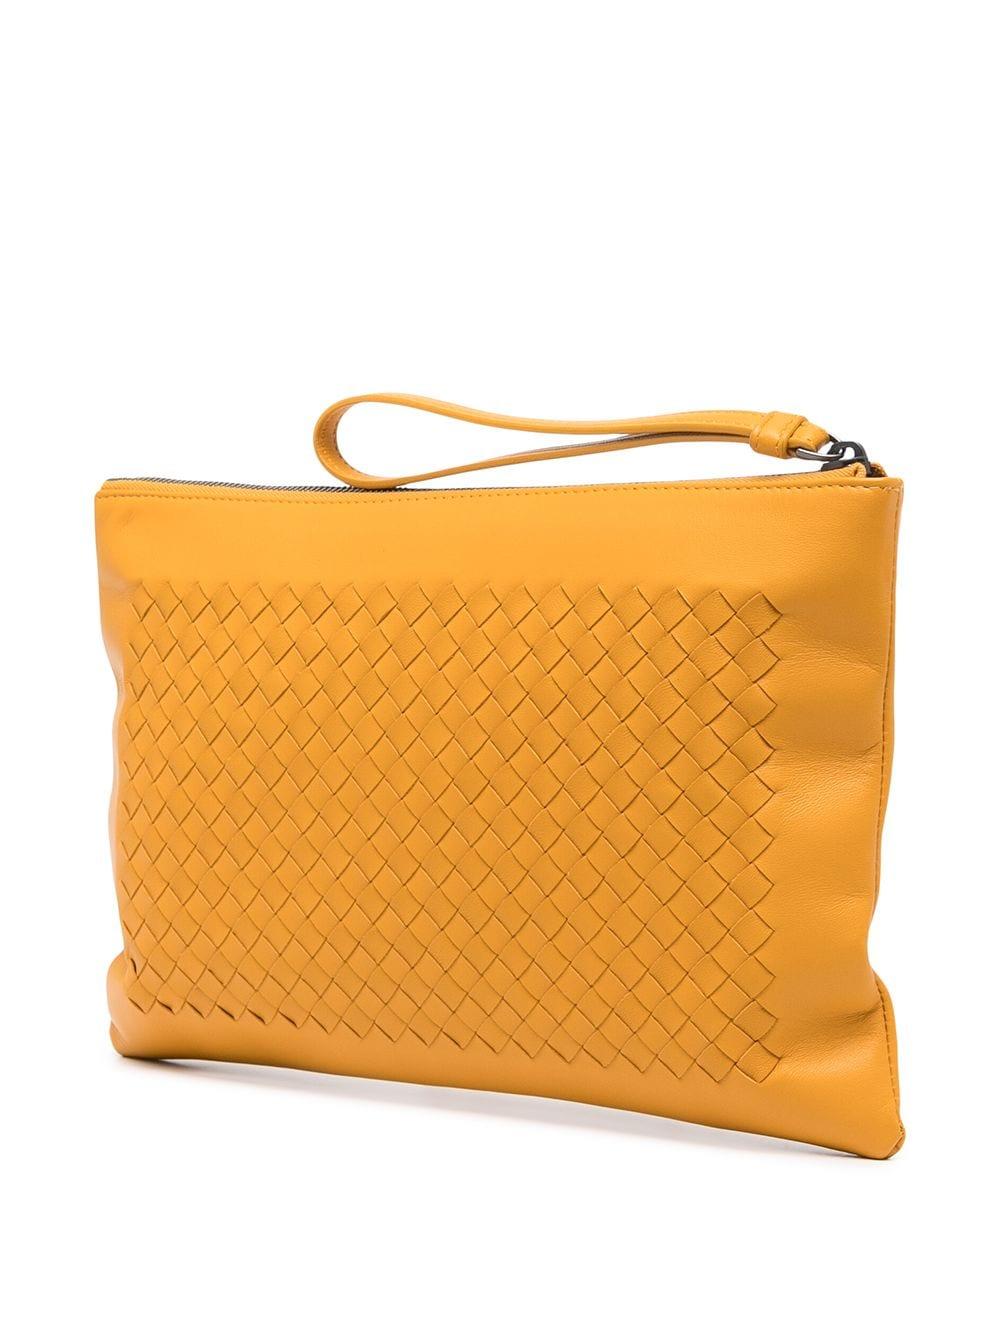 Bottega Veneta showcases their signature Intrecciato weaving on this pre-owned zip-fastening pouch bag. In orange, featuring a top zip fastening, wrist strap and a spacious main compartment, it's the perfect go to bag to fit all essentials for a